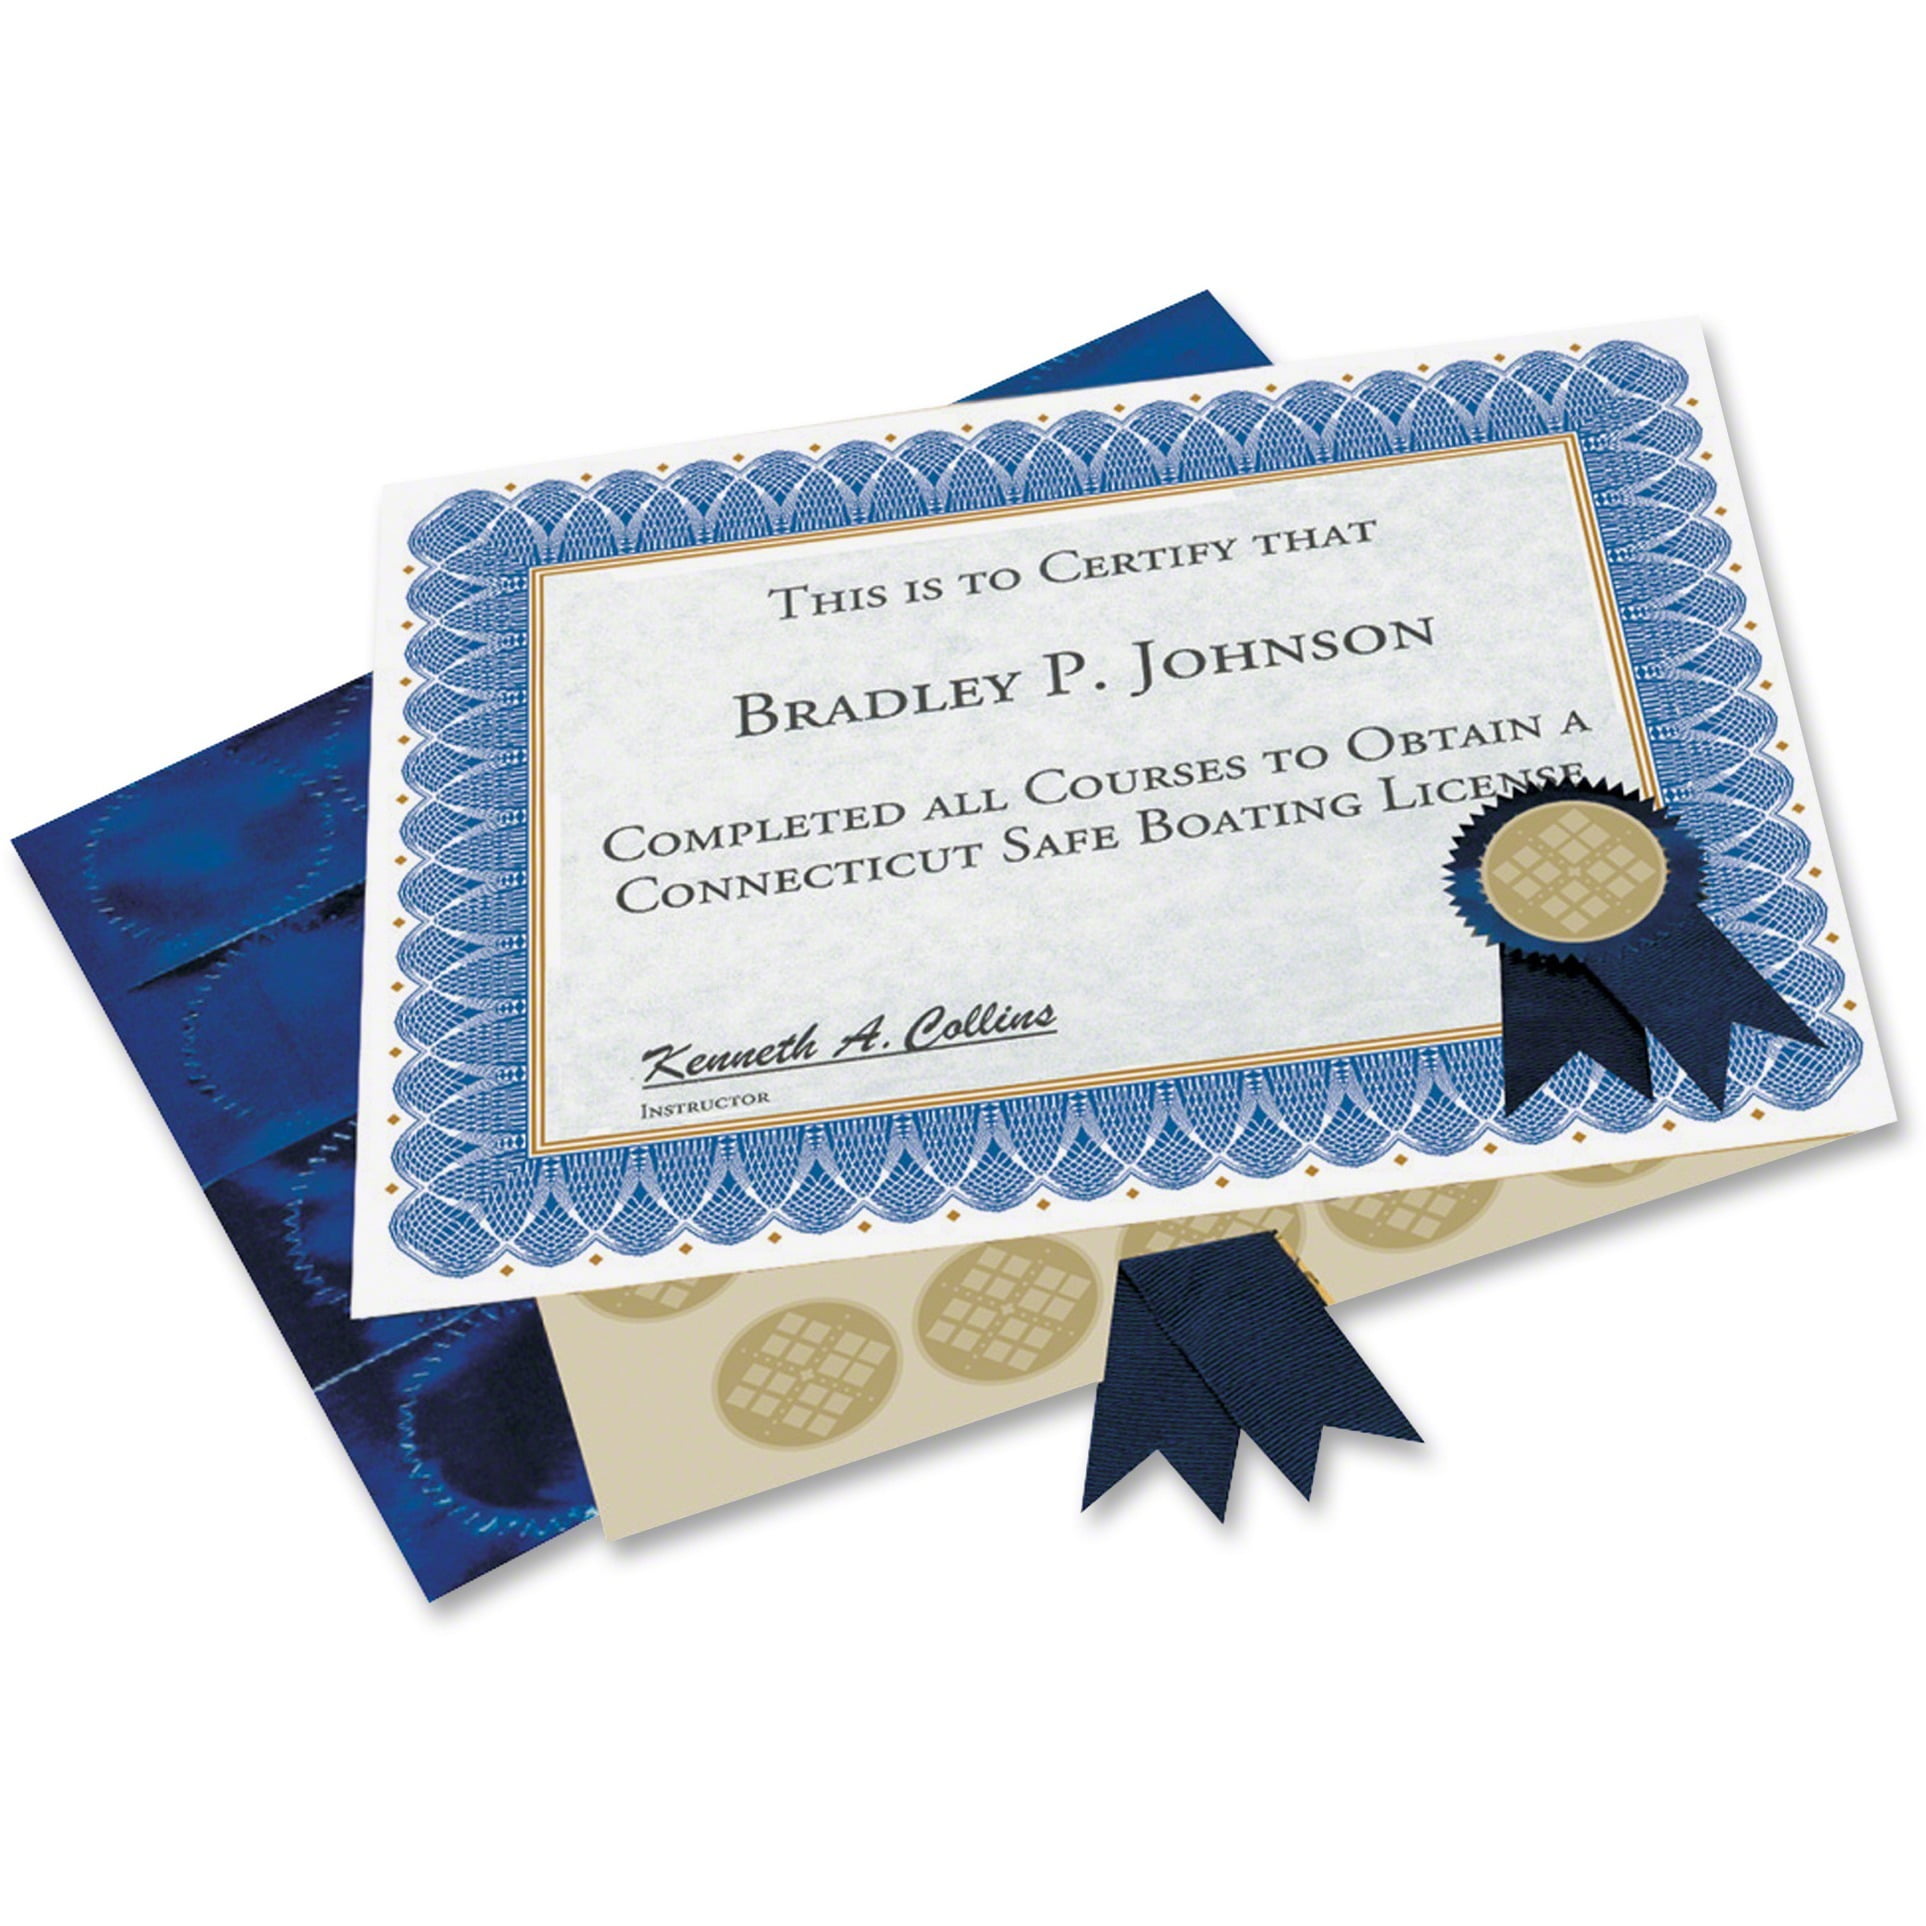 "CONGRATULATIONS" Award 1½" x 8" Foil-Stamped Ribbons LOTS of 100 